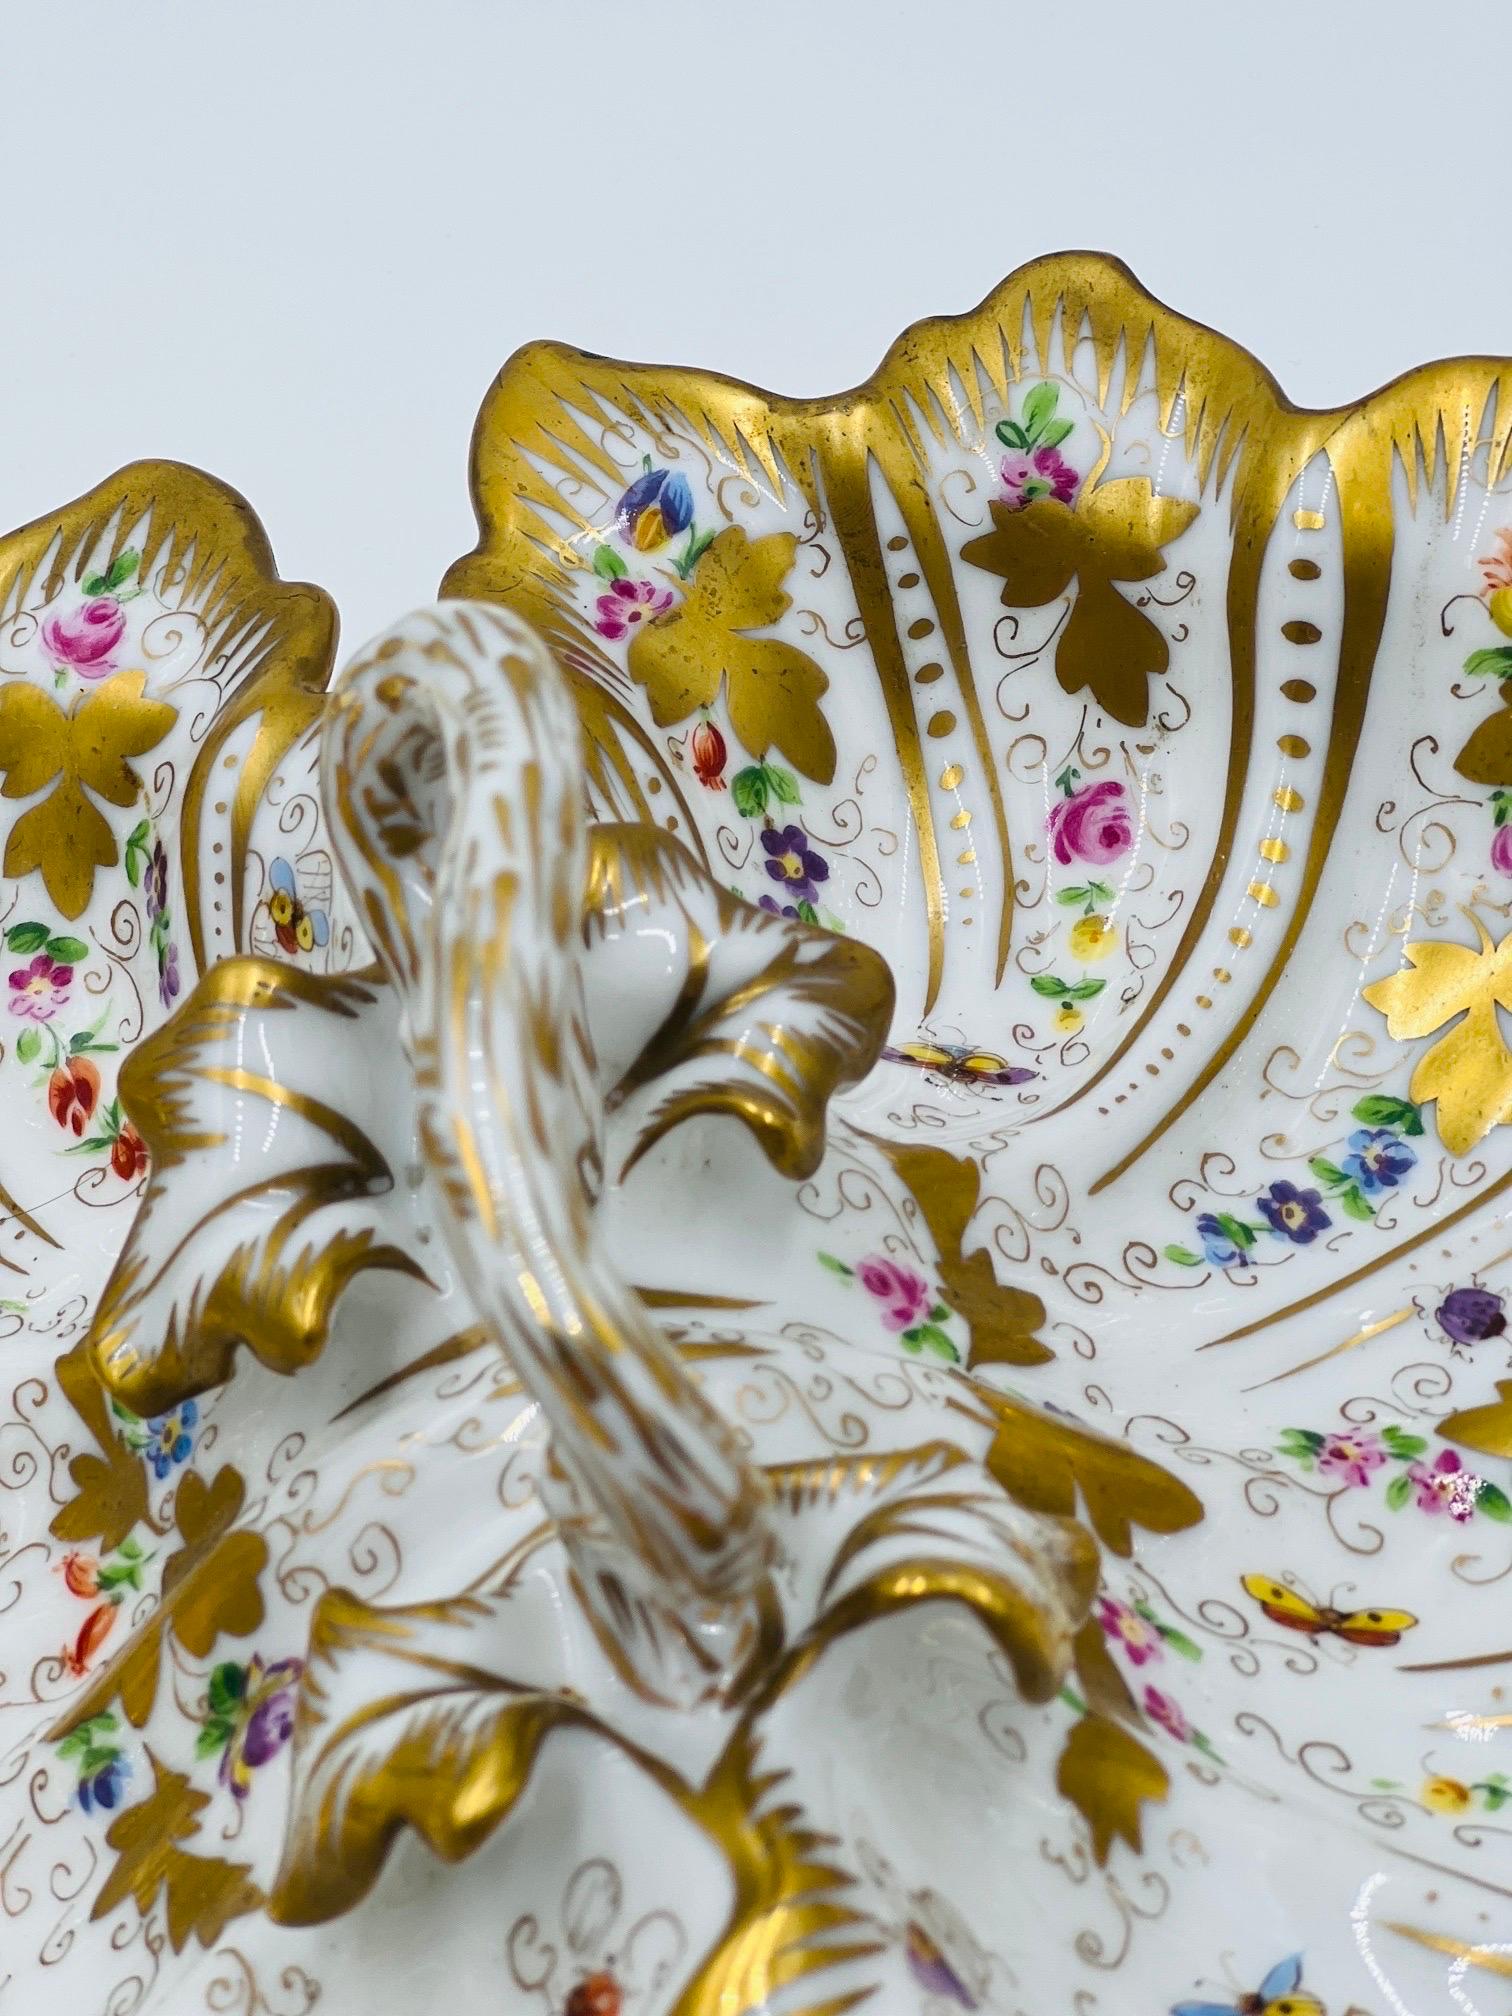 Antique Ornate CT Carl Tielsch Germany Floral Divided Handled Dish Herend Style For Sale 2